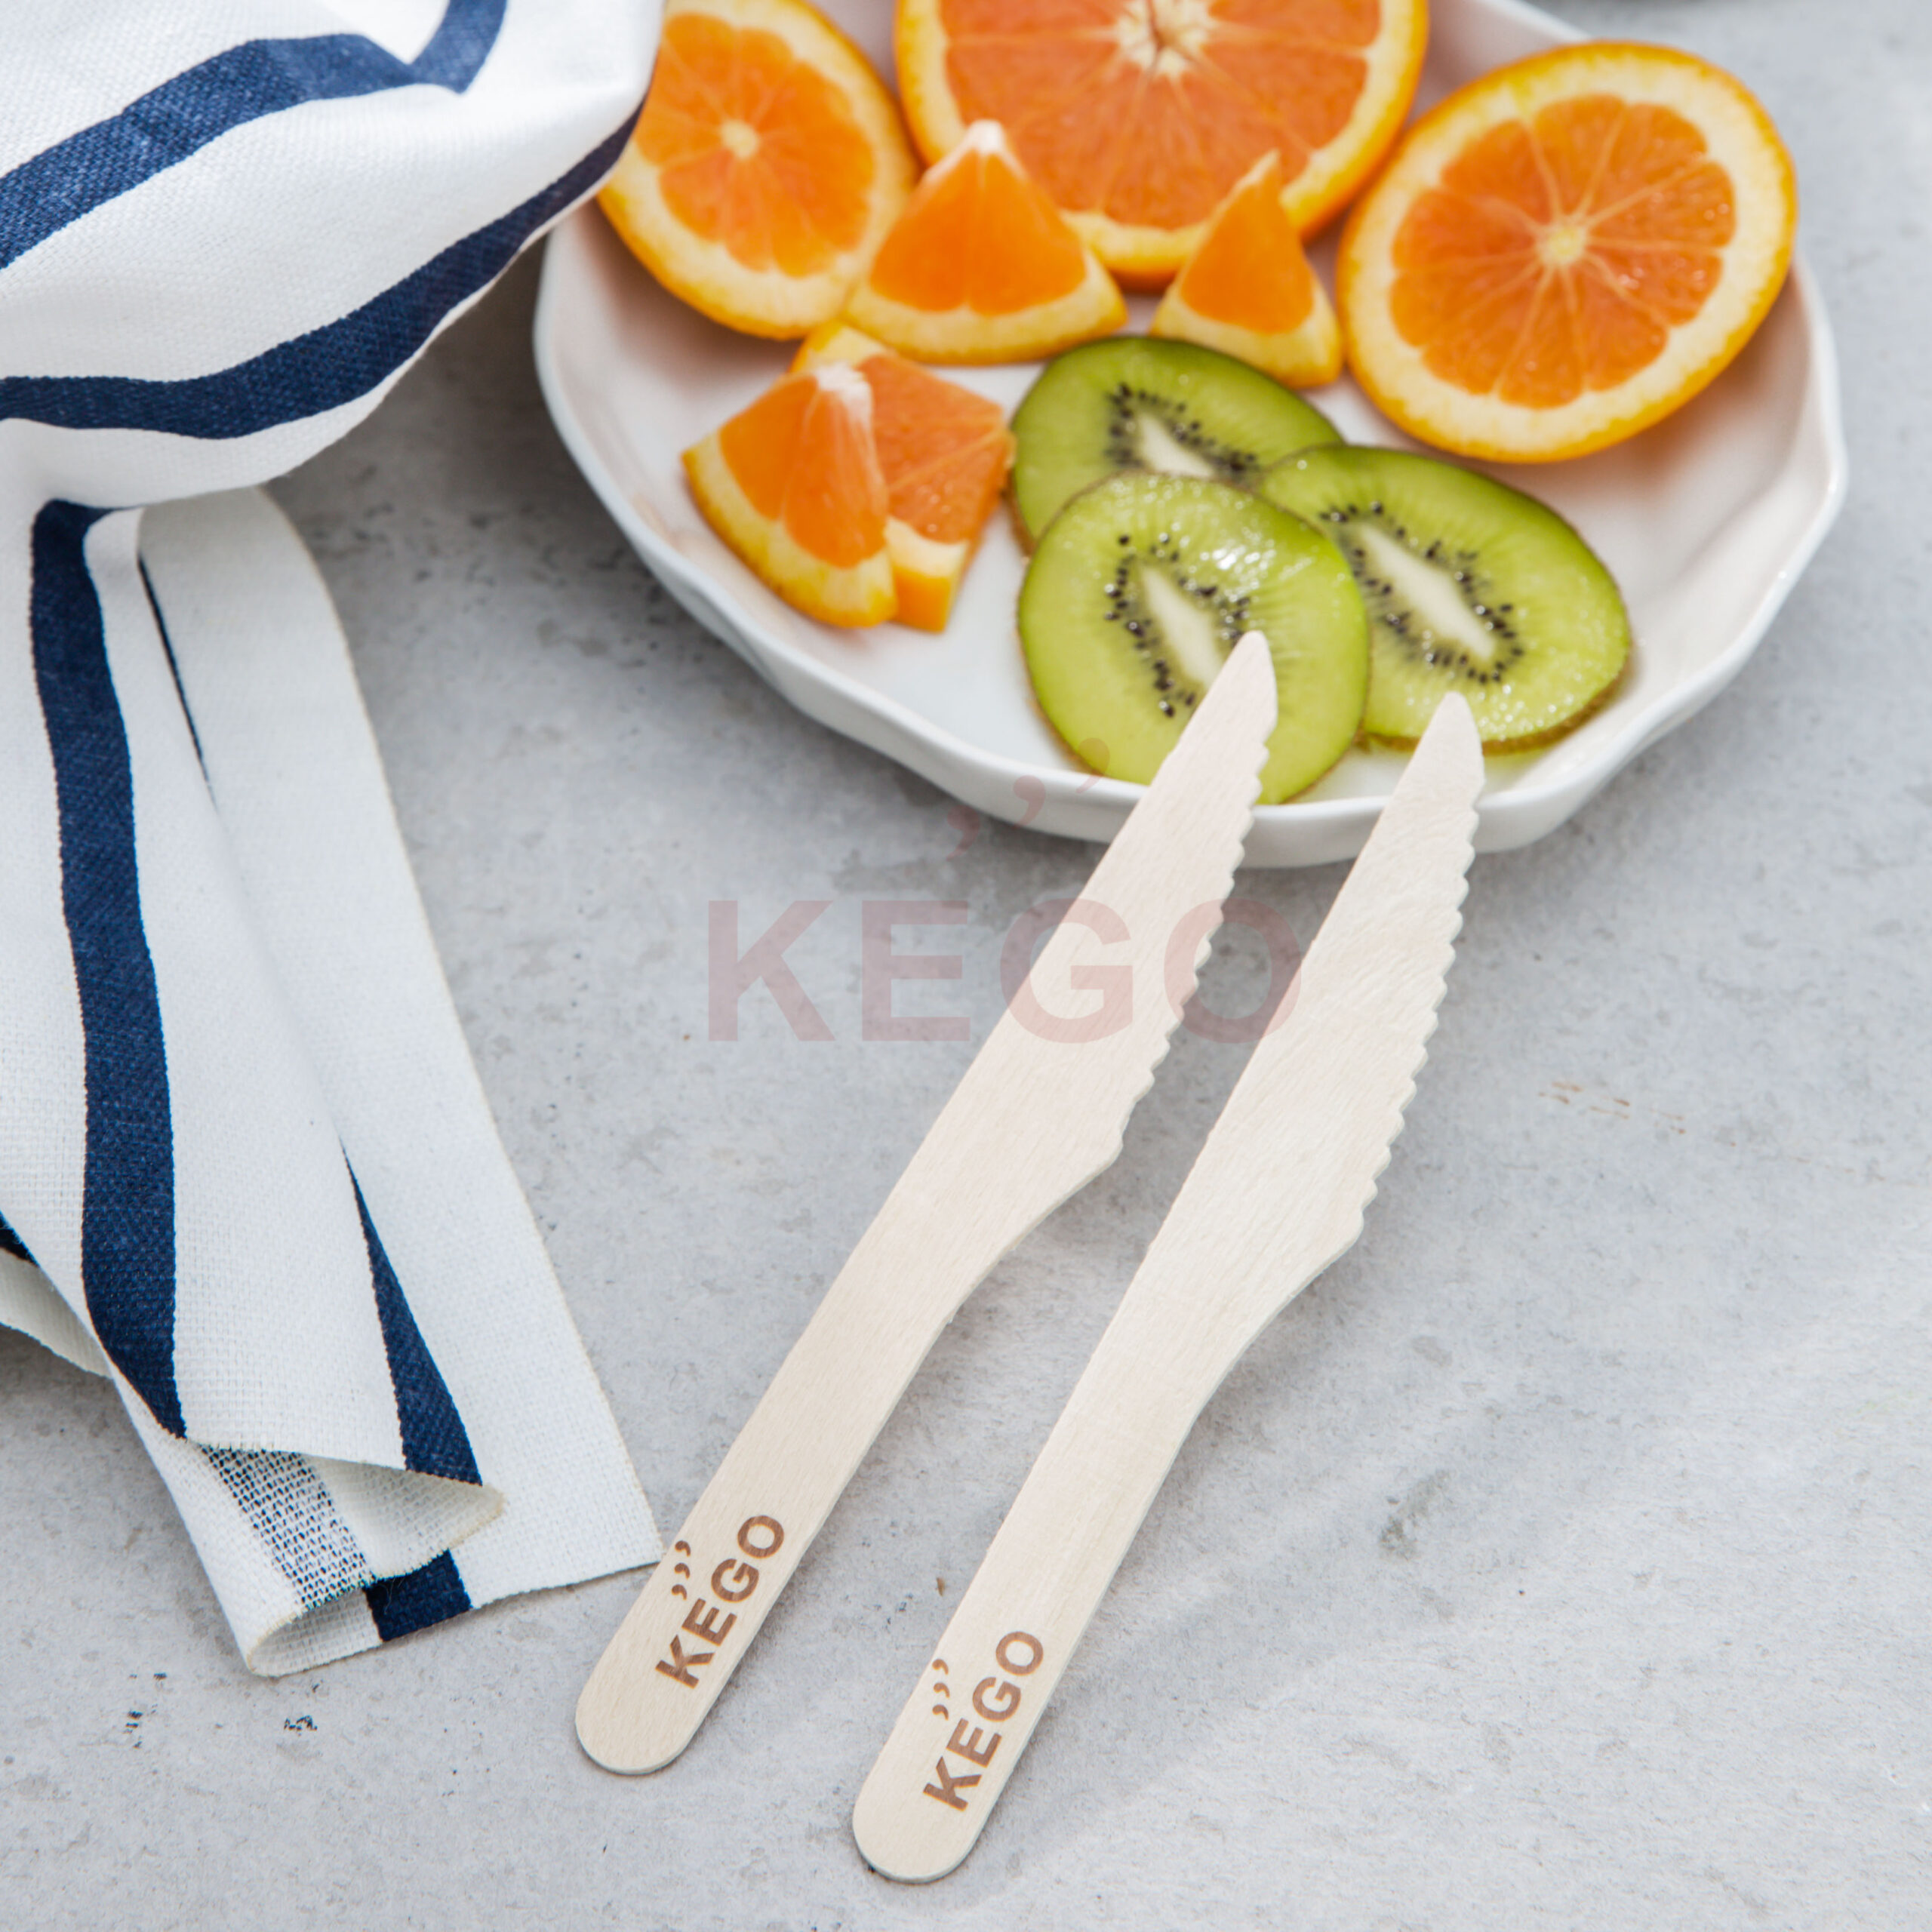 https://disposablewoodencutlery.com/wp-content/uploads/2015/09/Disposable-Wooden-Knife-165-4-scaled.jpg